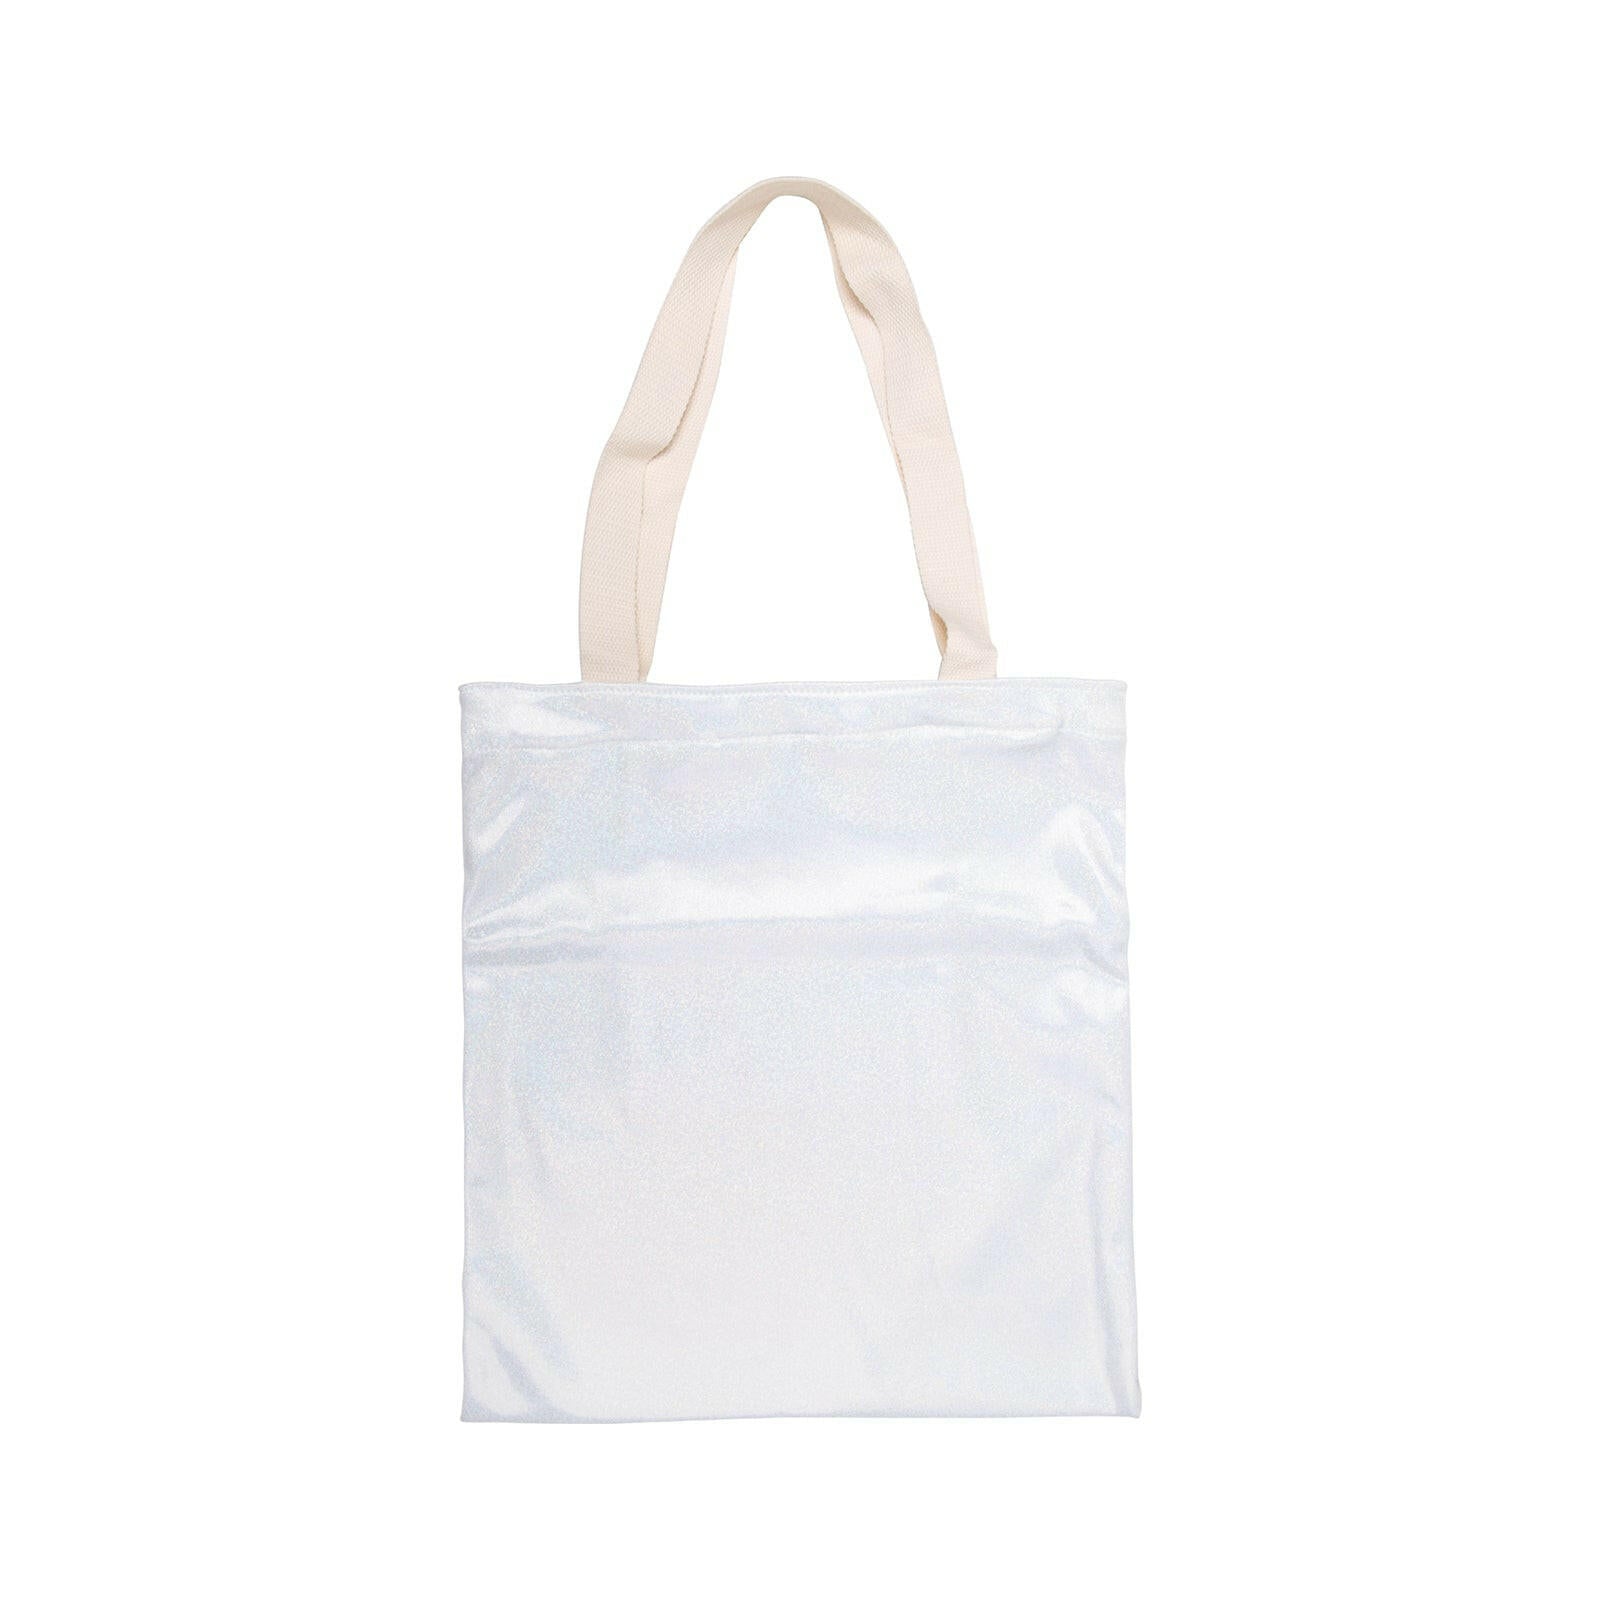 Glitter Sublimation Tote Bags - 2 Pack.